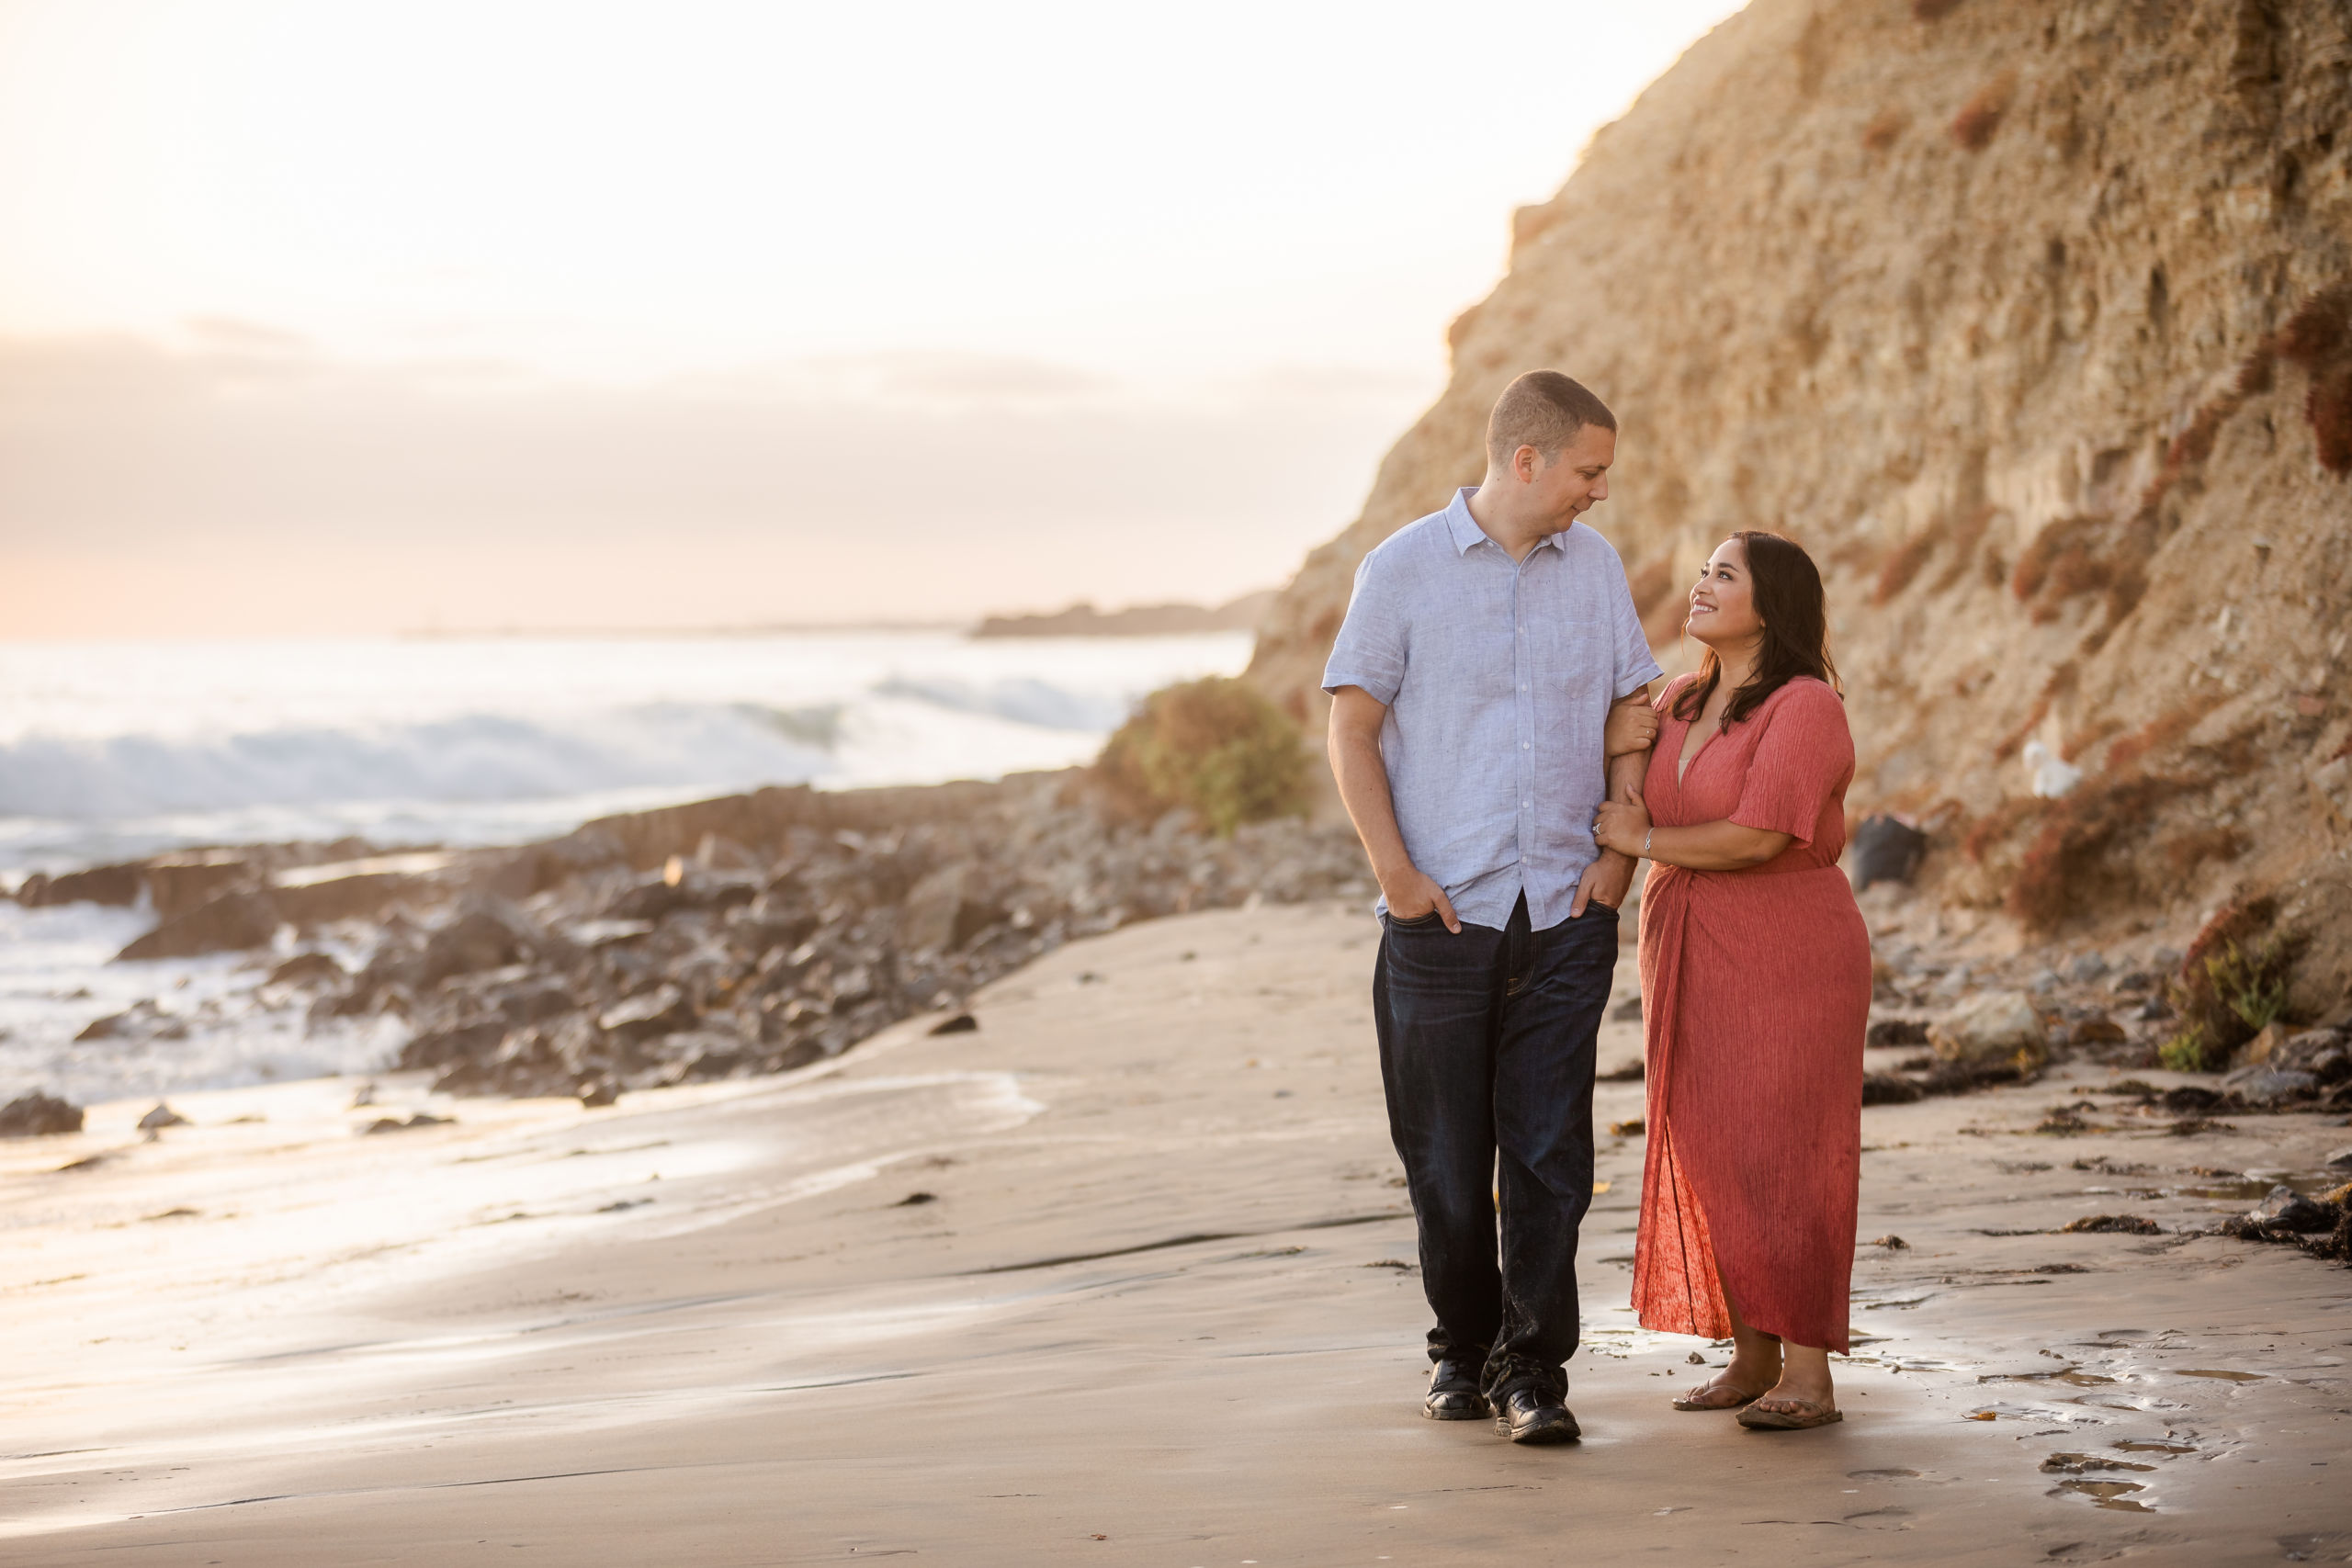 0071 AJ Crystal Cove State Park Orange County Engagement Photography